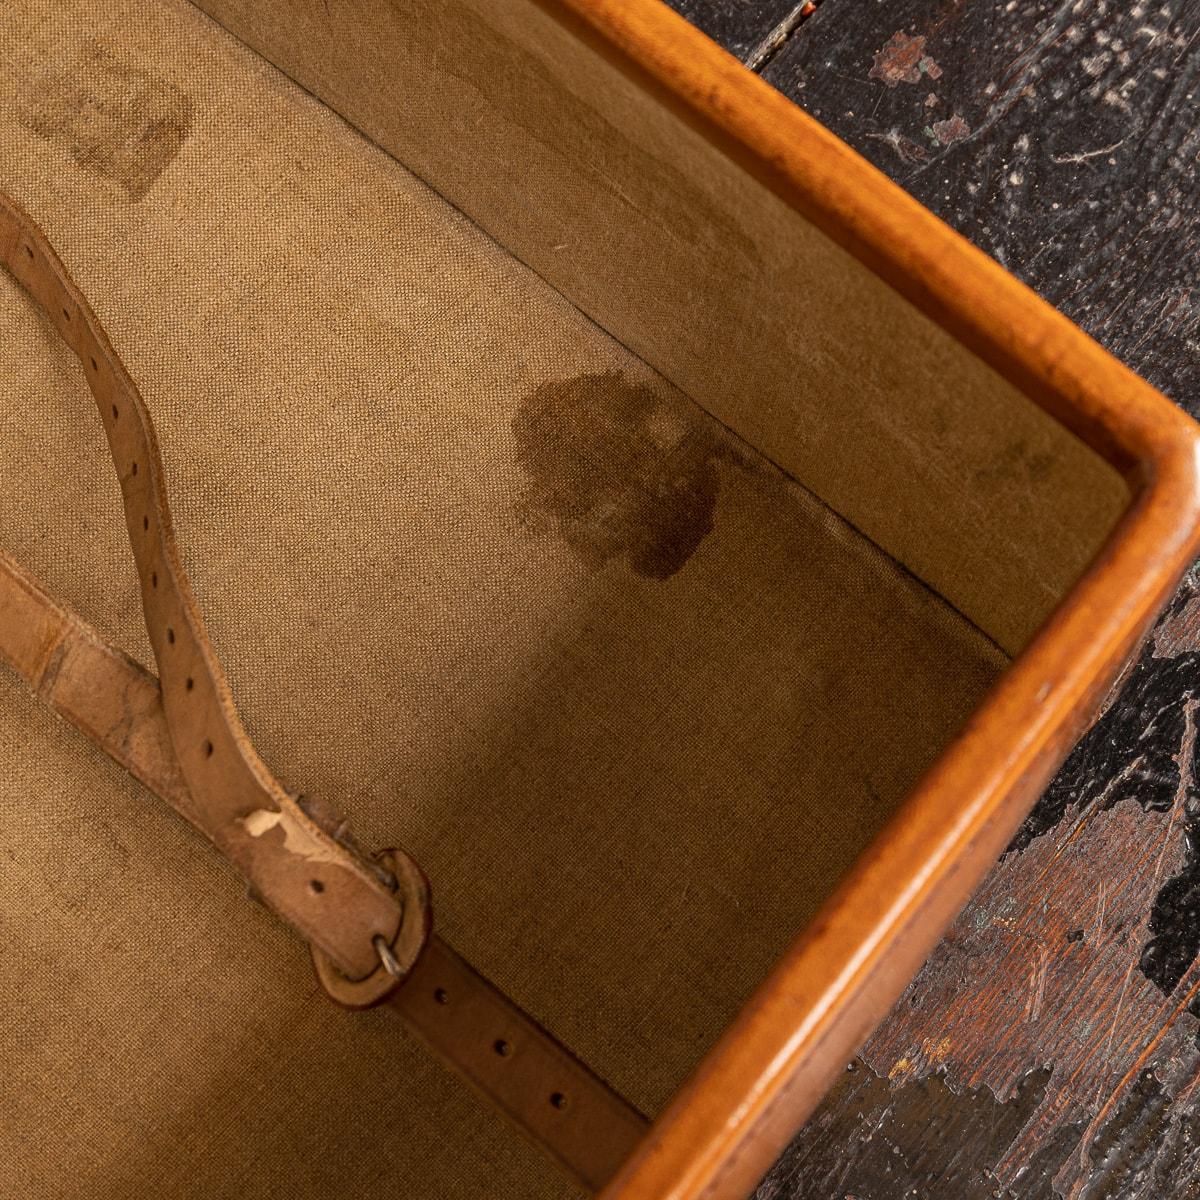 20th Century Revelation Expanding Leather Suitcase, c.1920 For Sale 8